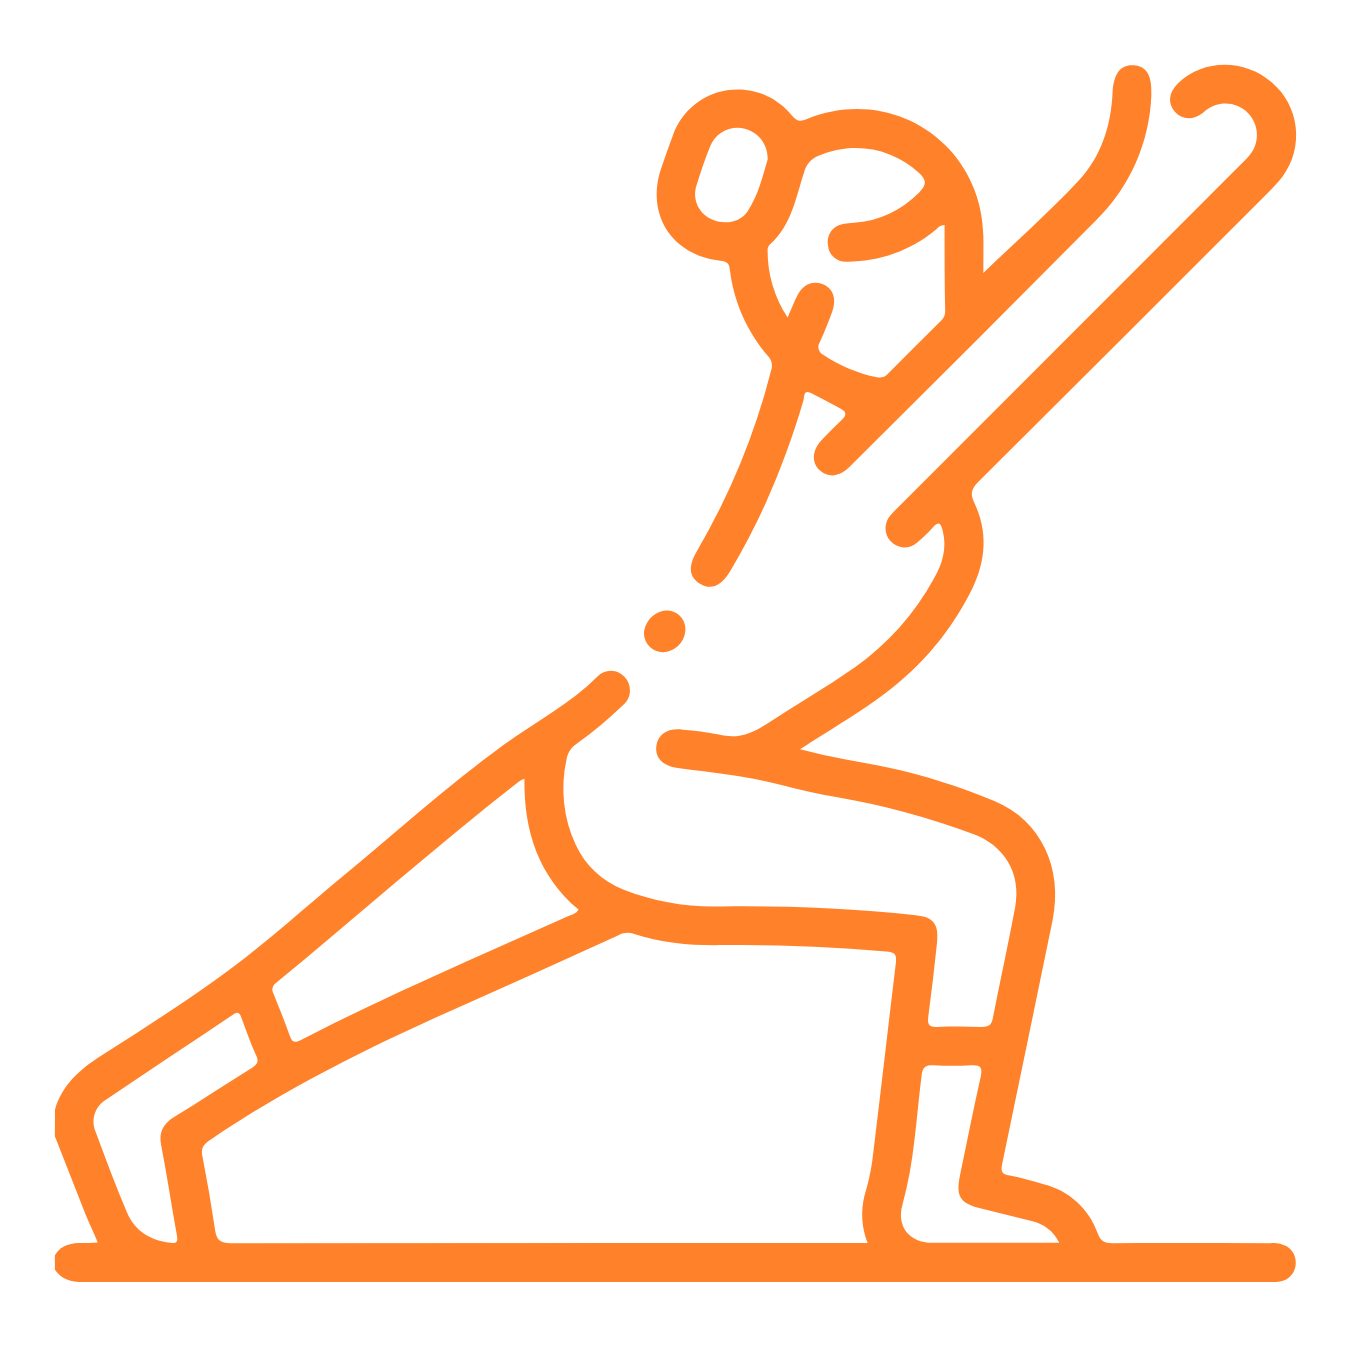 An orange colored icon depicting 